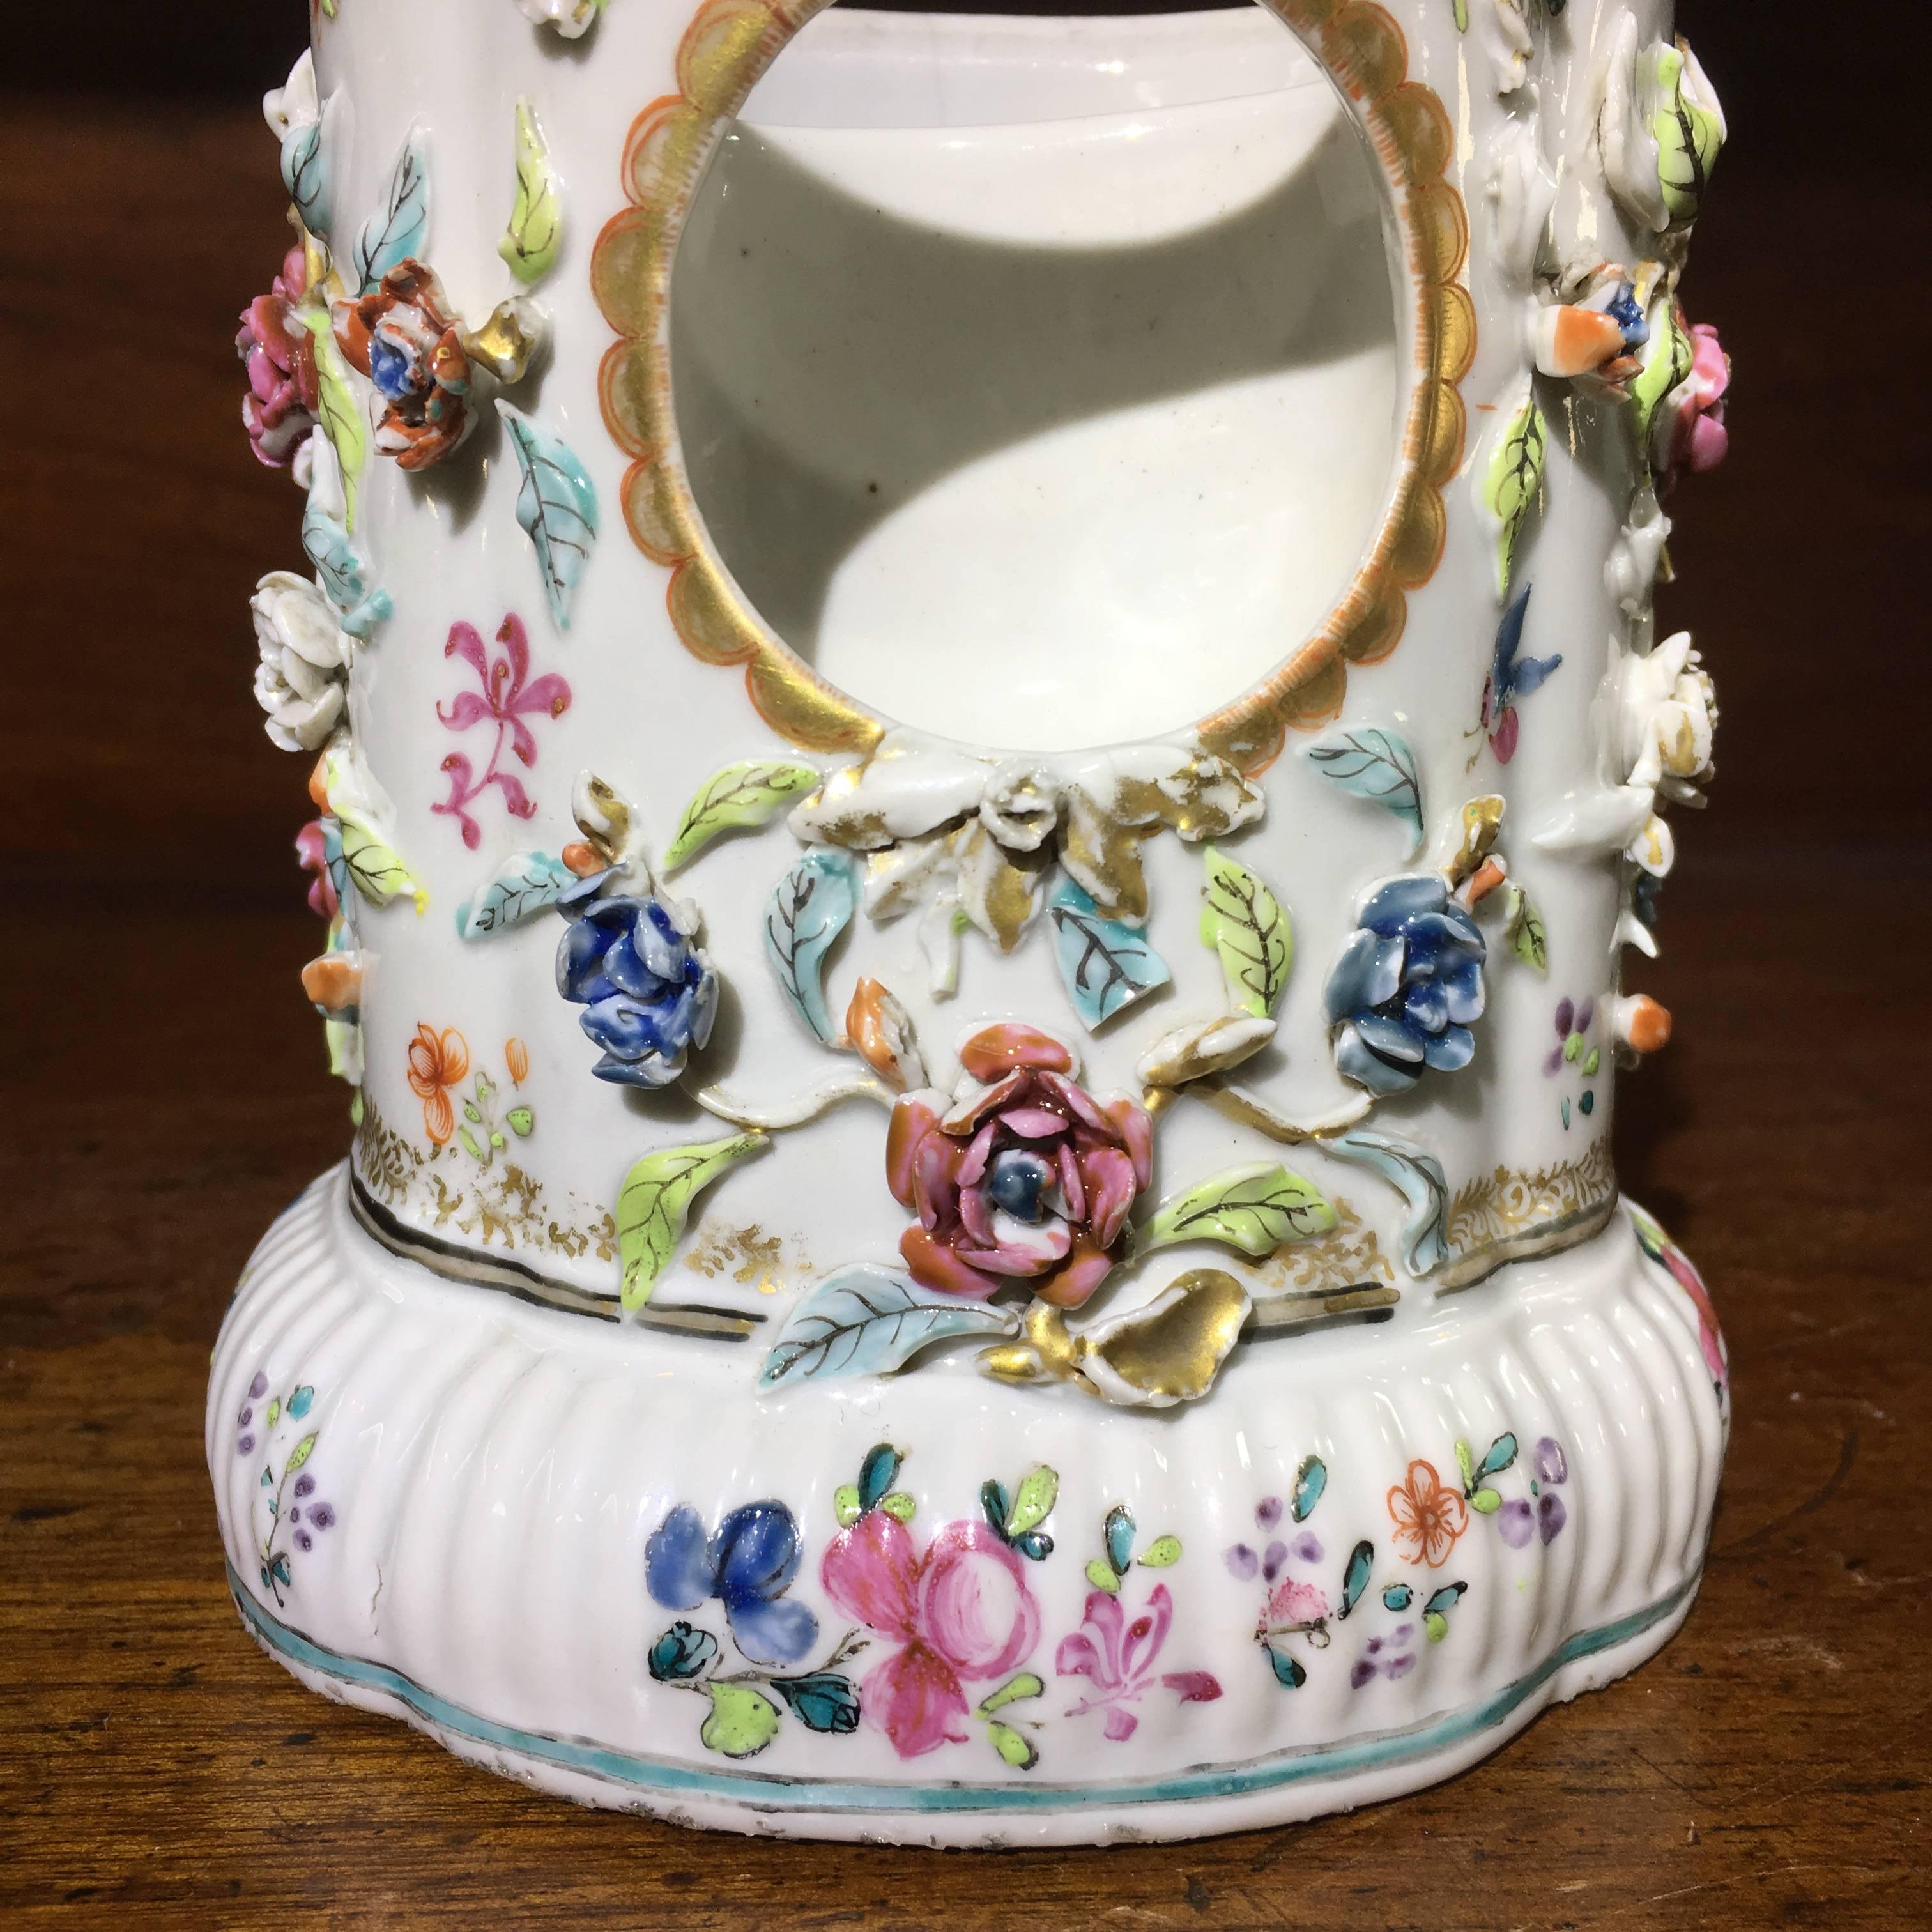 Chinese export watch stand, the straight sided form encrusted with colorful flowering vines, with gilt highlights, circa 1750.